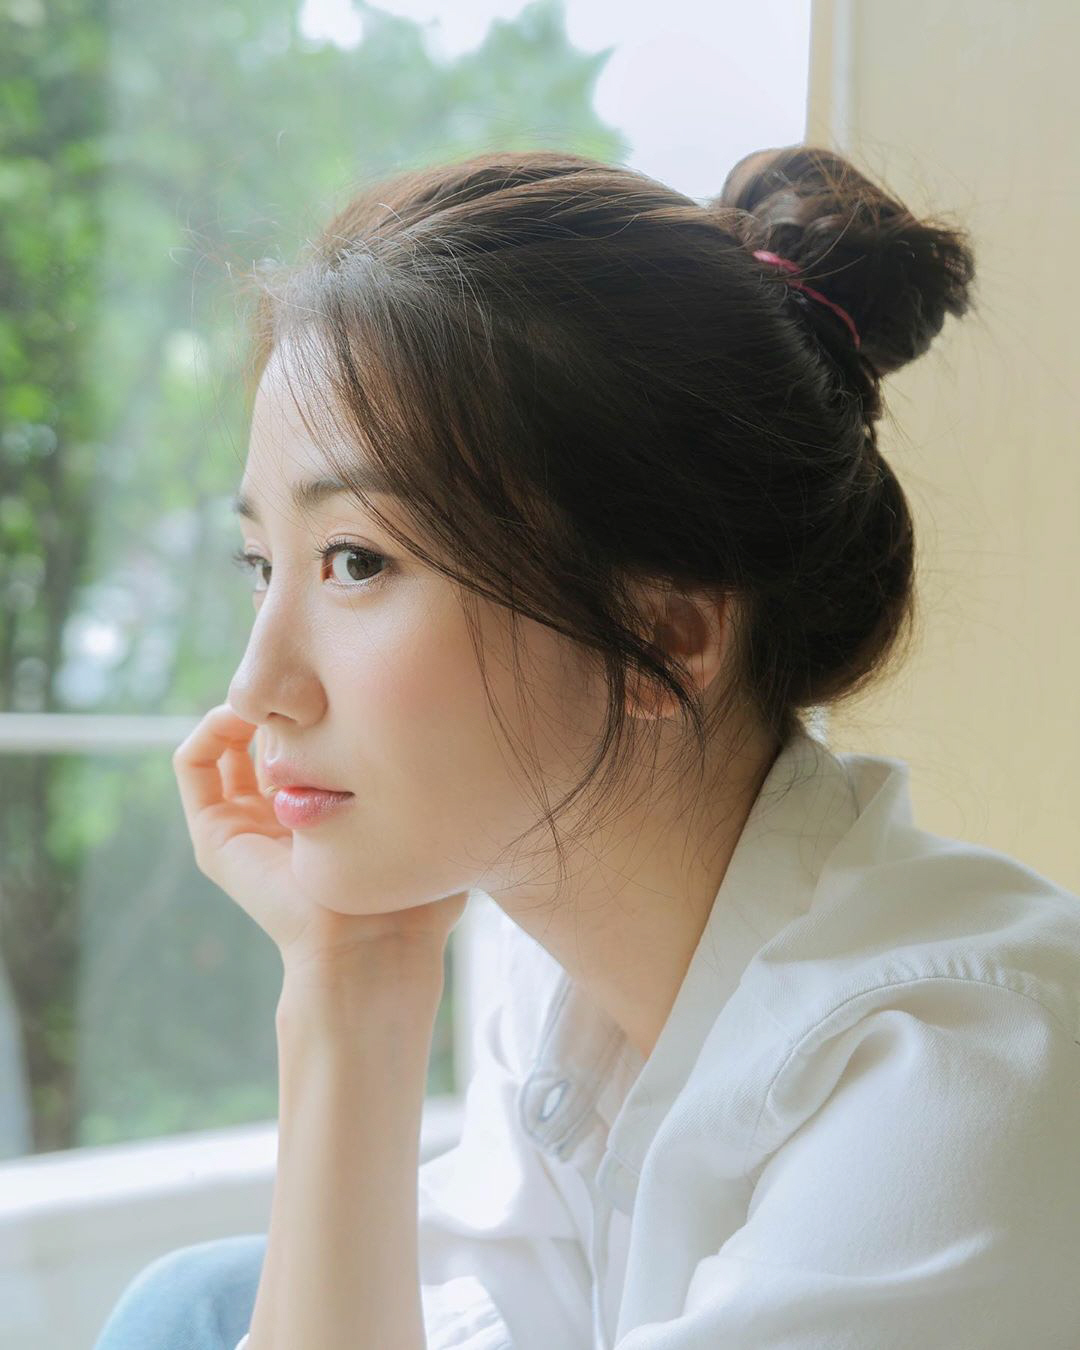 Actor Park Ha-sun also flaunted humiliating beautiful looks on Close-UpPark Ha-sun posted several photos on his instagram on the 4th with an article entitled morning!The photo released shows Park Ha-sun wearing a white blouse; Park Ha-sun poses with a natural tying her hair.Even the elegant sidelines and close-up of Park Ha-sun stand out for humiliating flawless beauty looks.In Park Ha-suns pure white beautiful look, netizens responded in various ways such as Its like an angel from the sky, Taste sniper cut and Meanwhile, Actor Park Ha-sun has a daughter, Actor Ryu Soo-young, married in 2017.Park Ha-sun will appear on TVN drama Sanhu Cooking Center scheduled to air in the second half of this year.